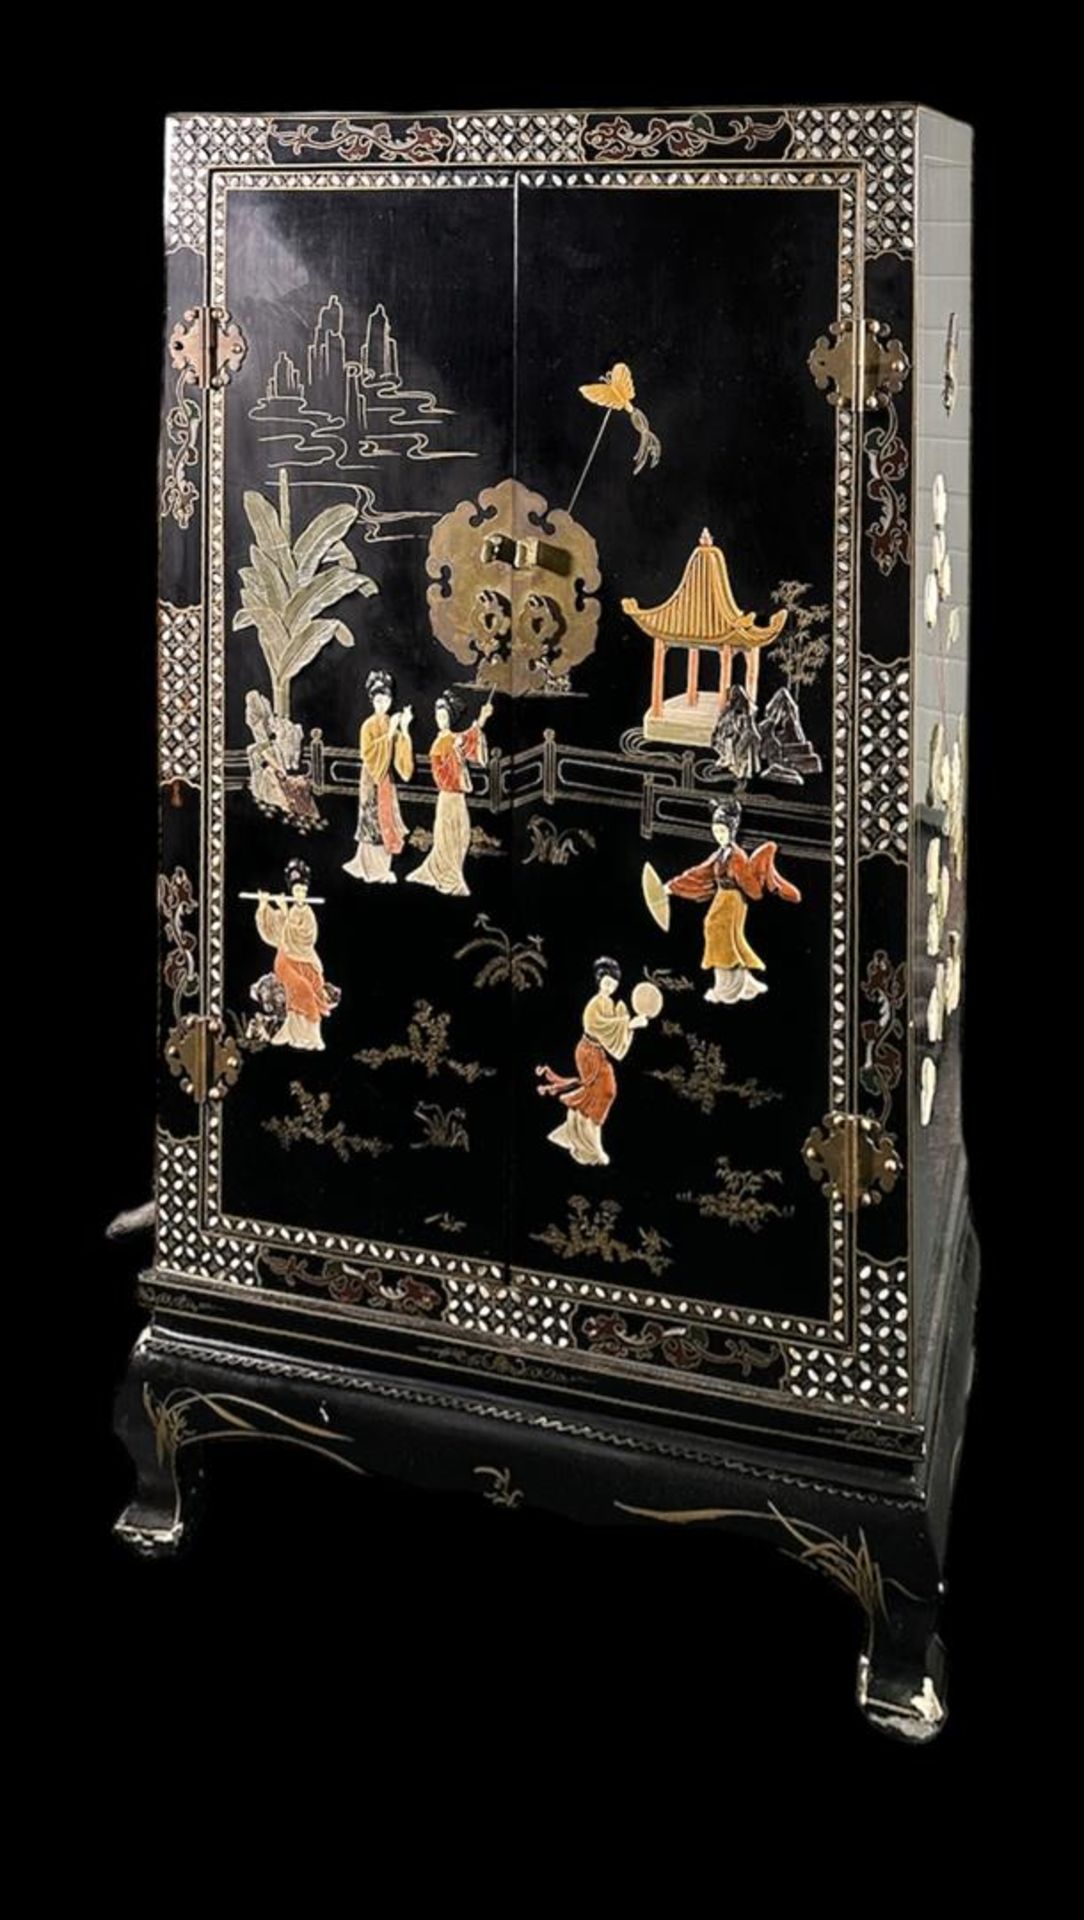 A black Chinese cabinet decorated with figures and court scenes in carved stone.
120 x 45 x 102 cm.